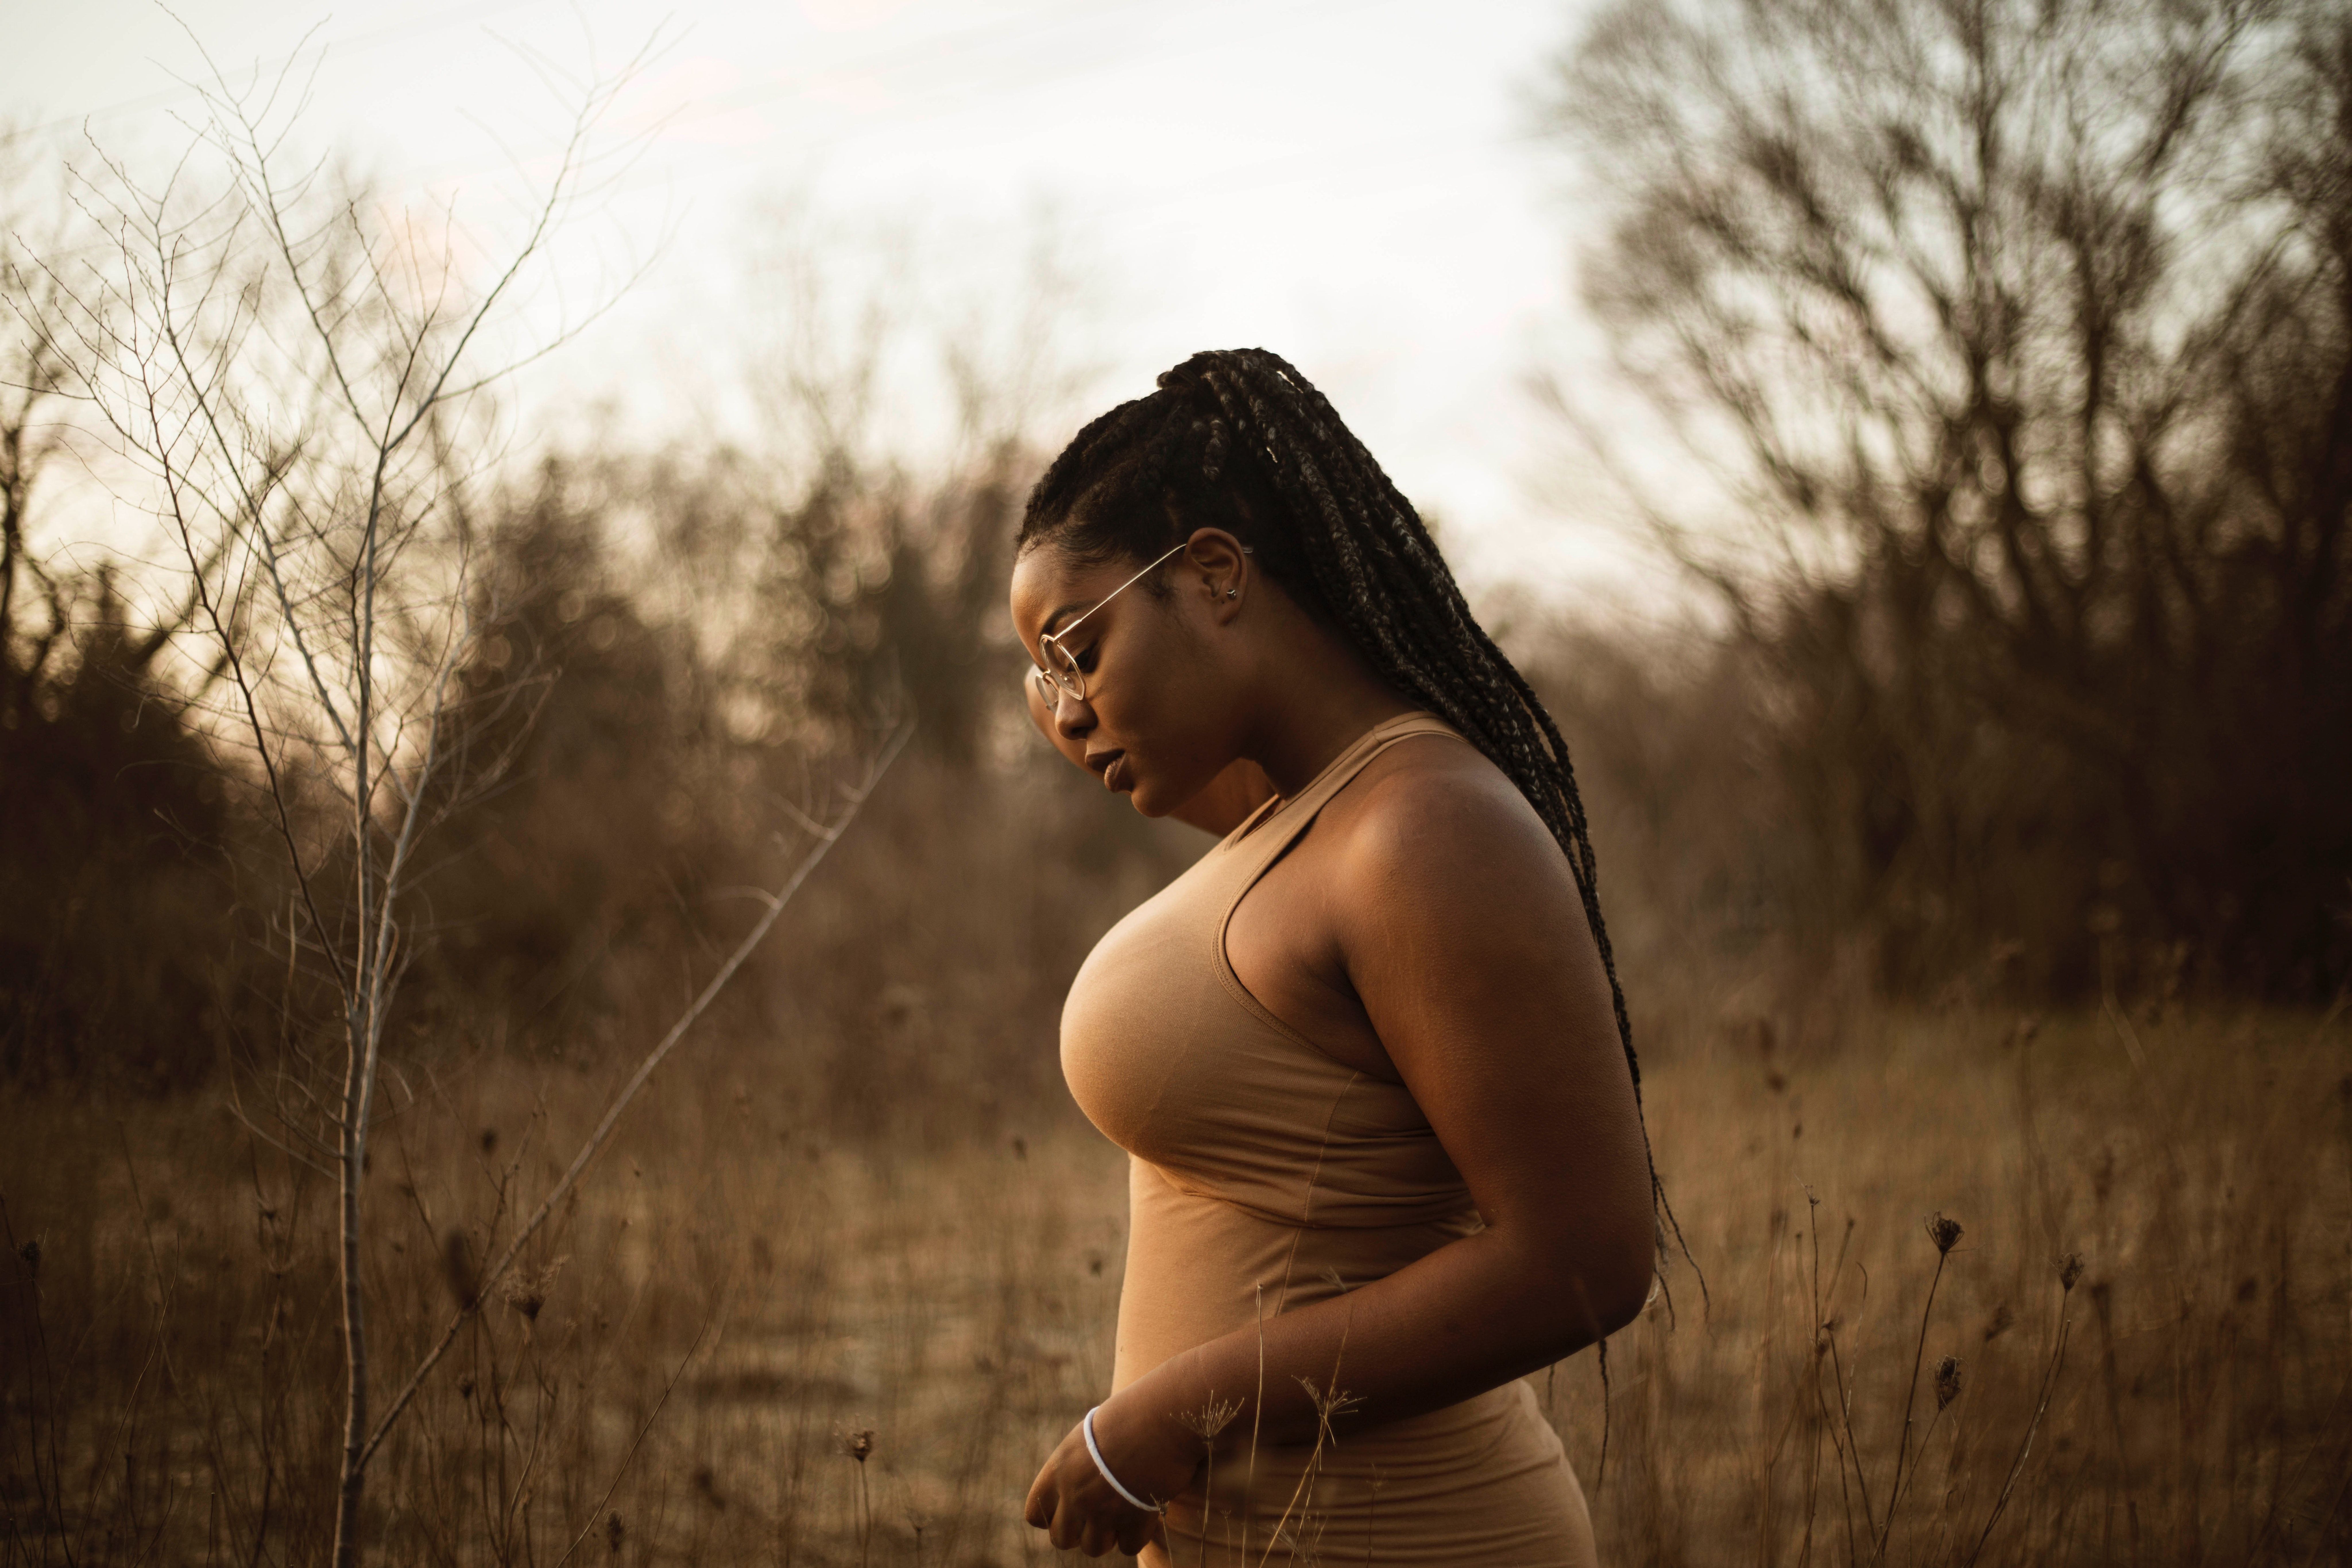 8688x5792 #strong, #melanin, #tree, #female, #african american, #brown, #Creative Commons image, #glasses, #black power, #black excellence, #black pride, #forest, #black, #black magic, #portrait, #natural hair, #african beauty, #woman